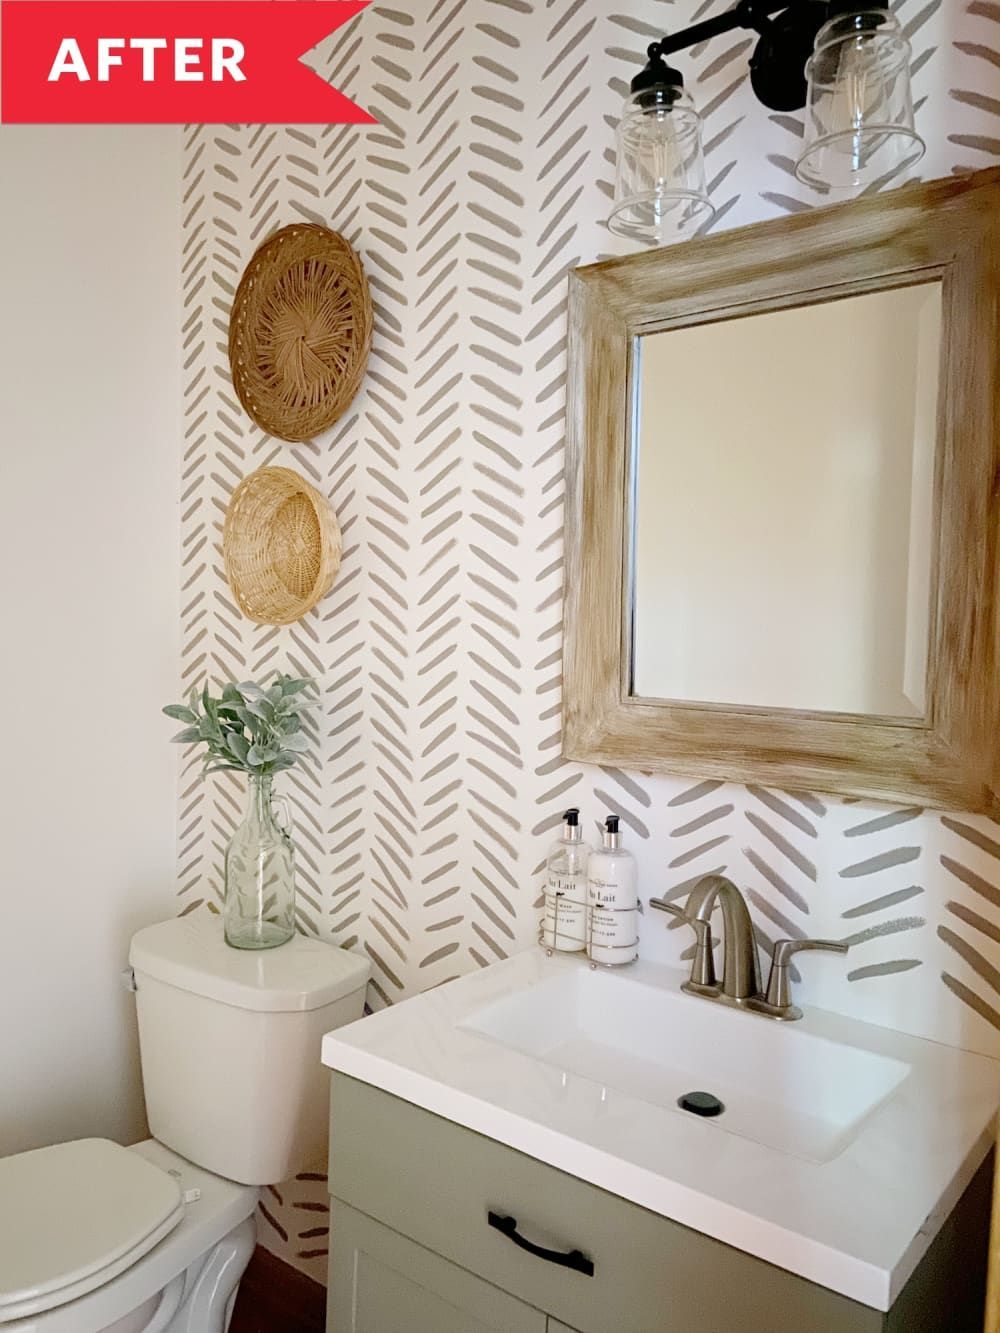 Before and After: This High-Impact Powder Room Overhaul Cost Just $65 (!!!) - Before and After: This High-Impact Powder Room Overhaul Cost Just $65 (!!!) -   14 diy Interieur muur ideas